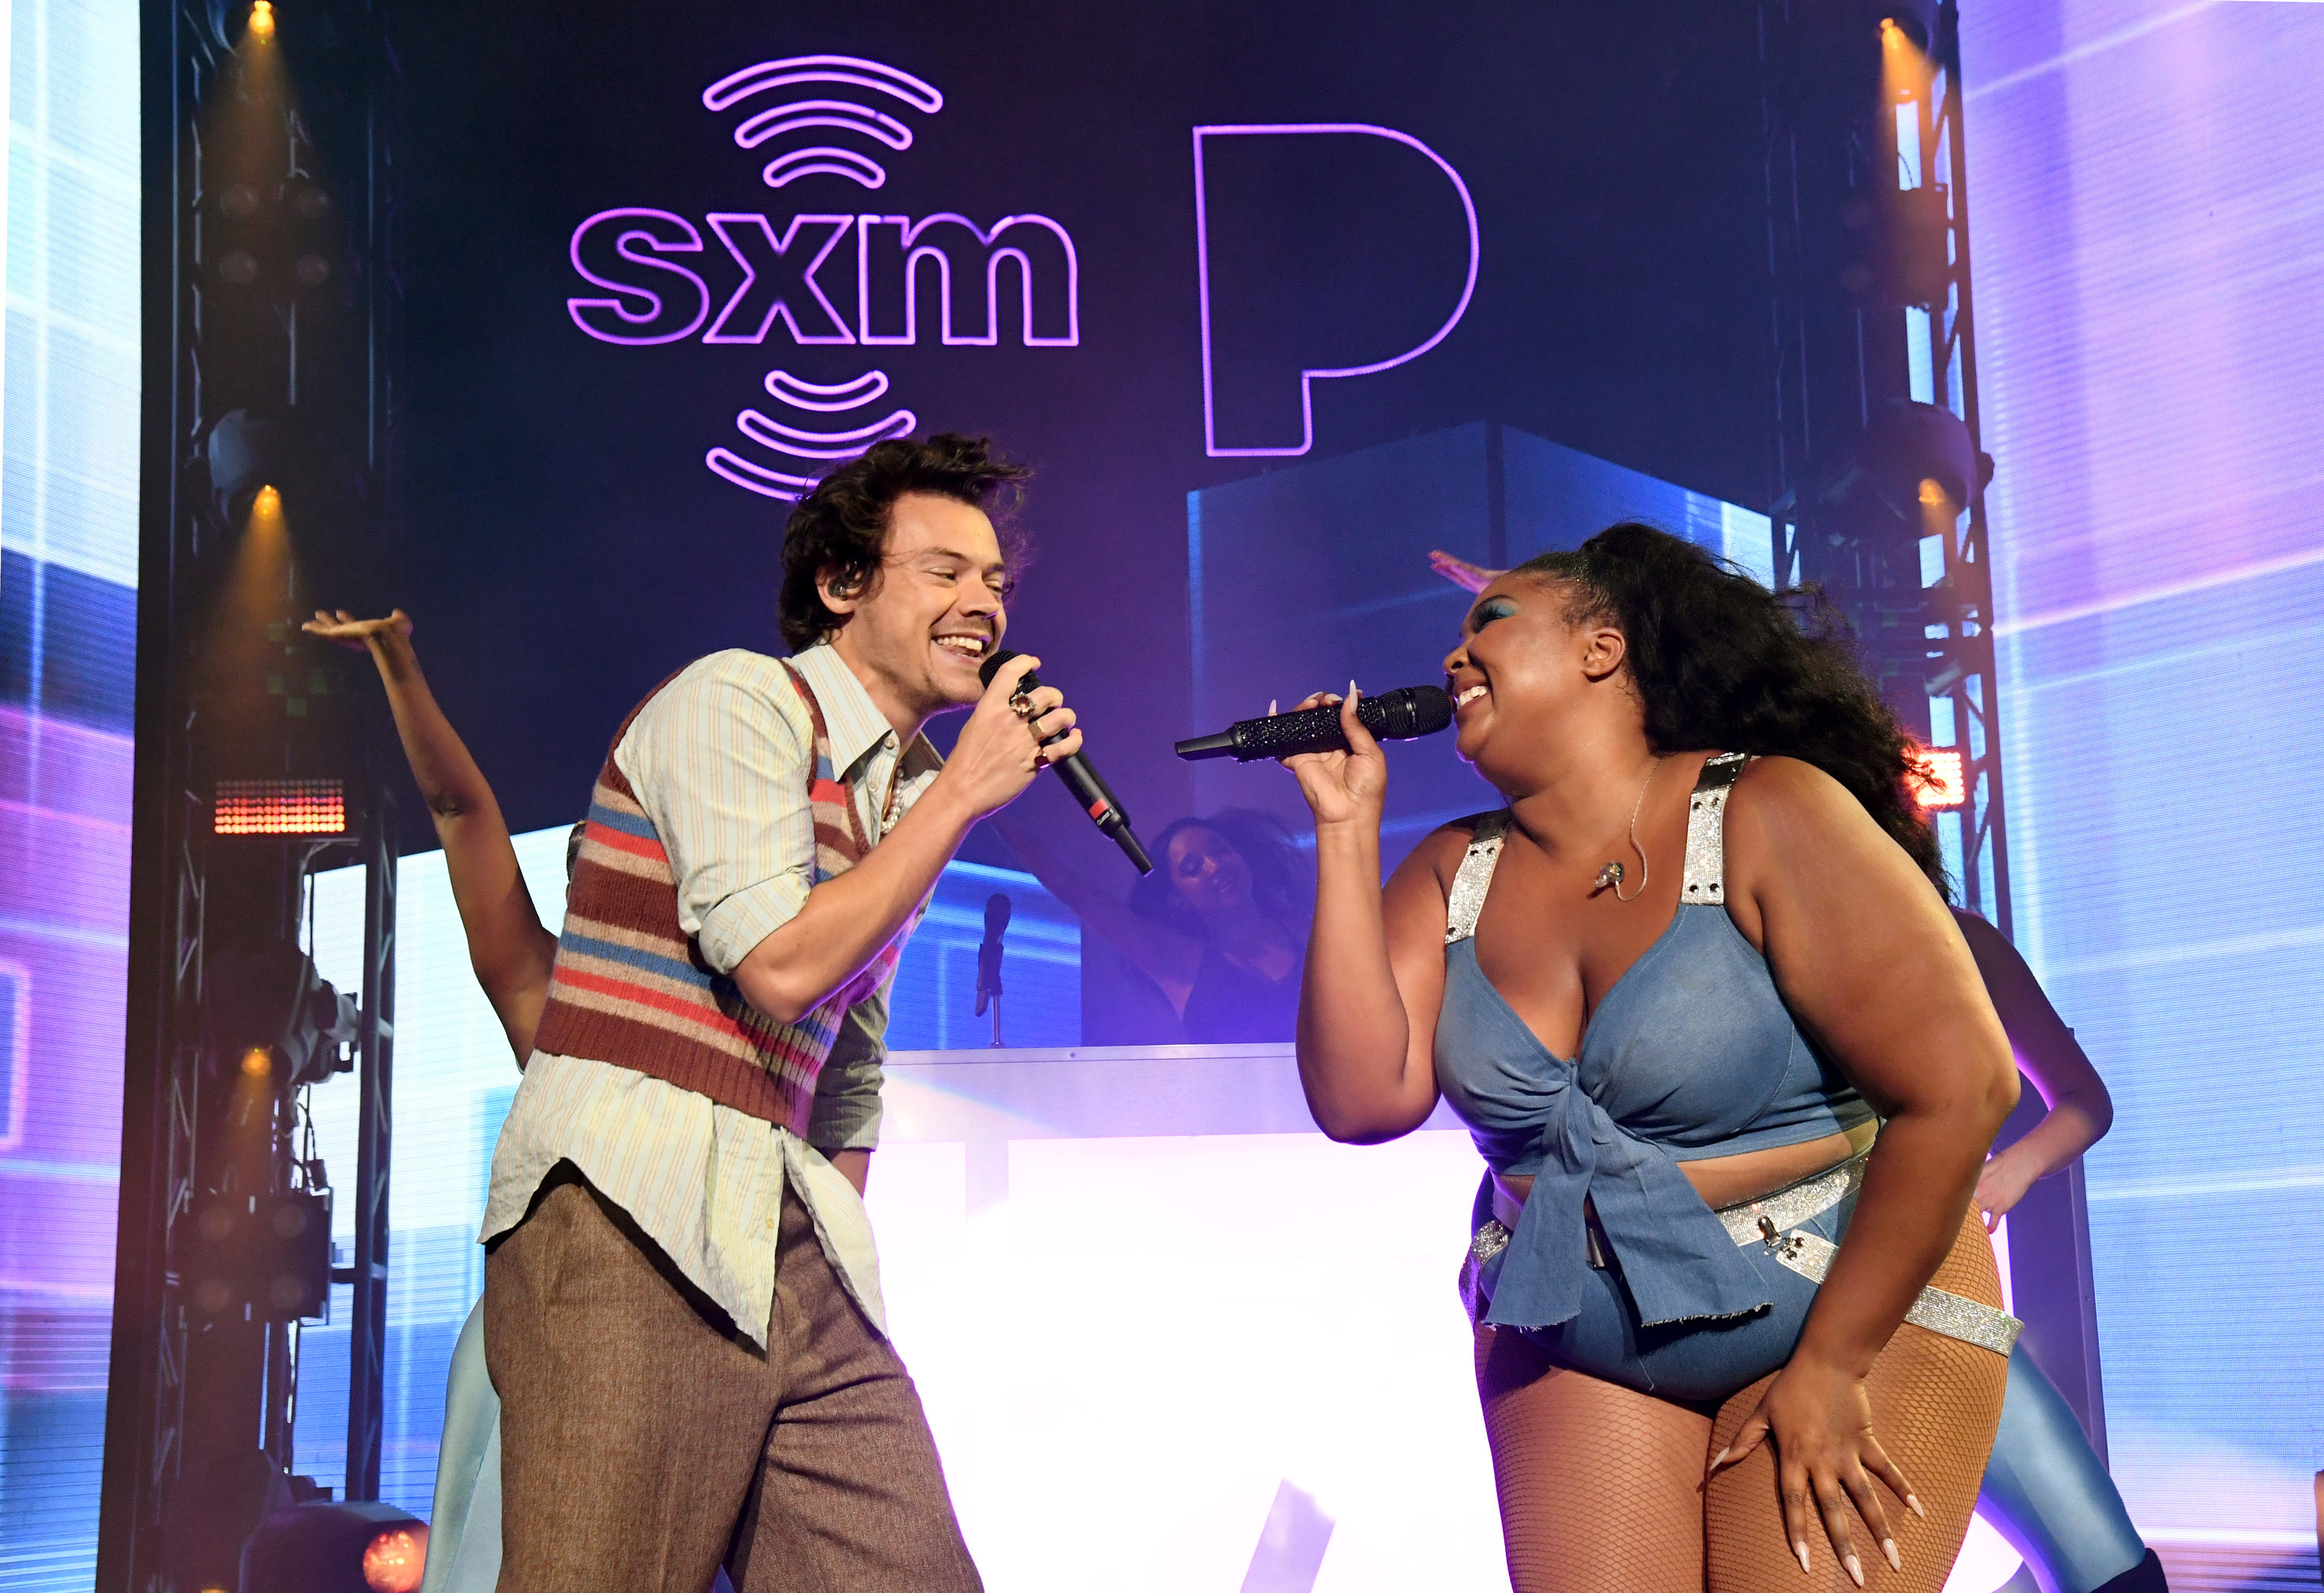 Harry Styles and Lizzo performing